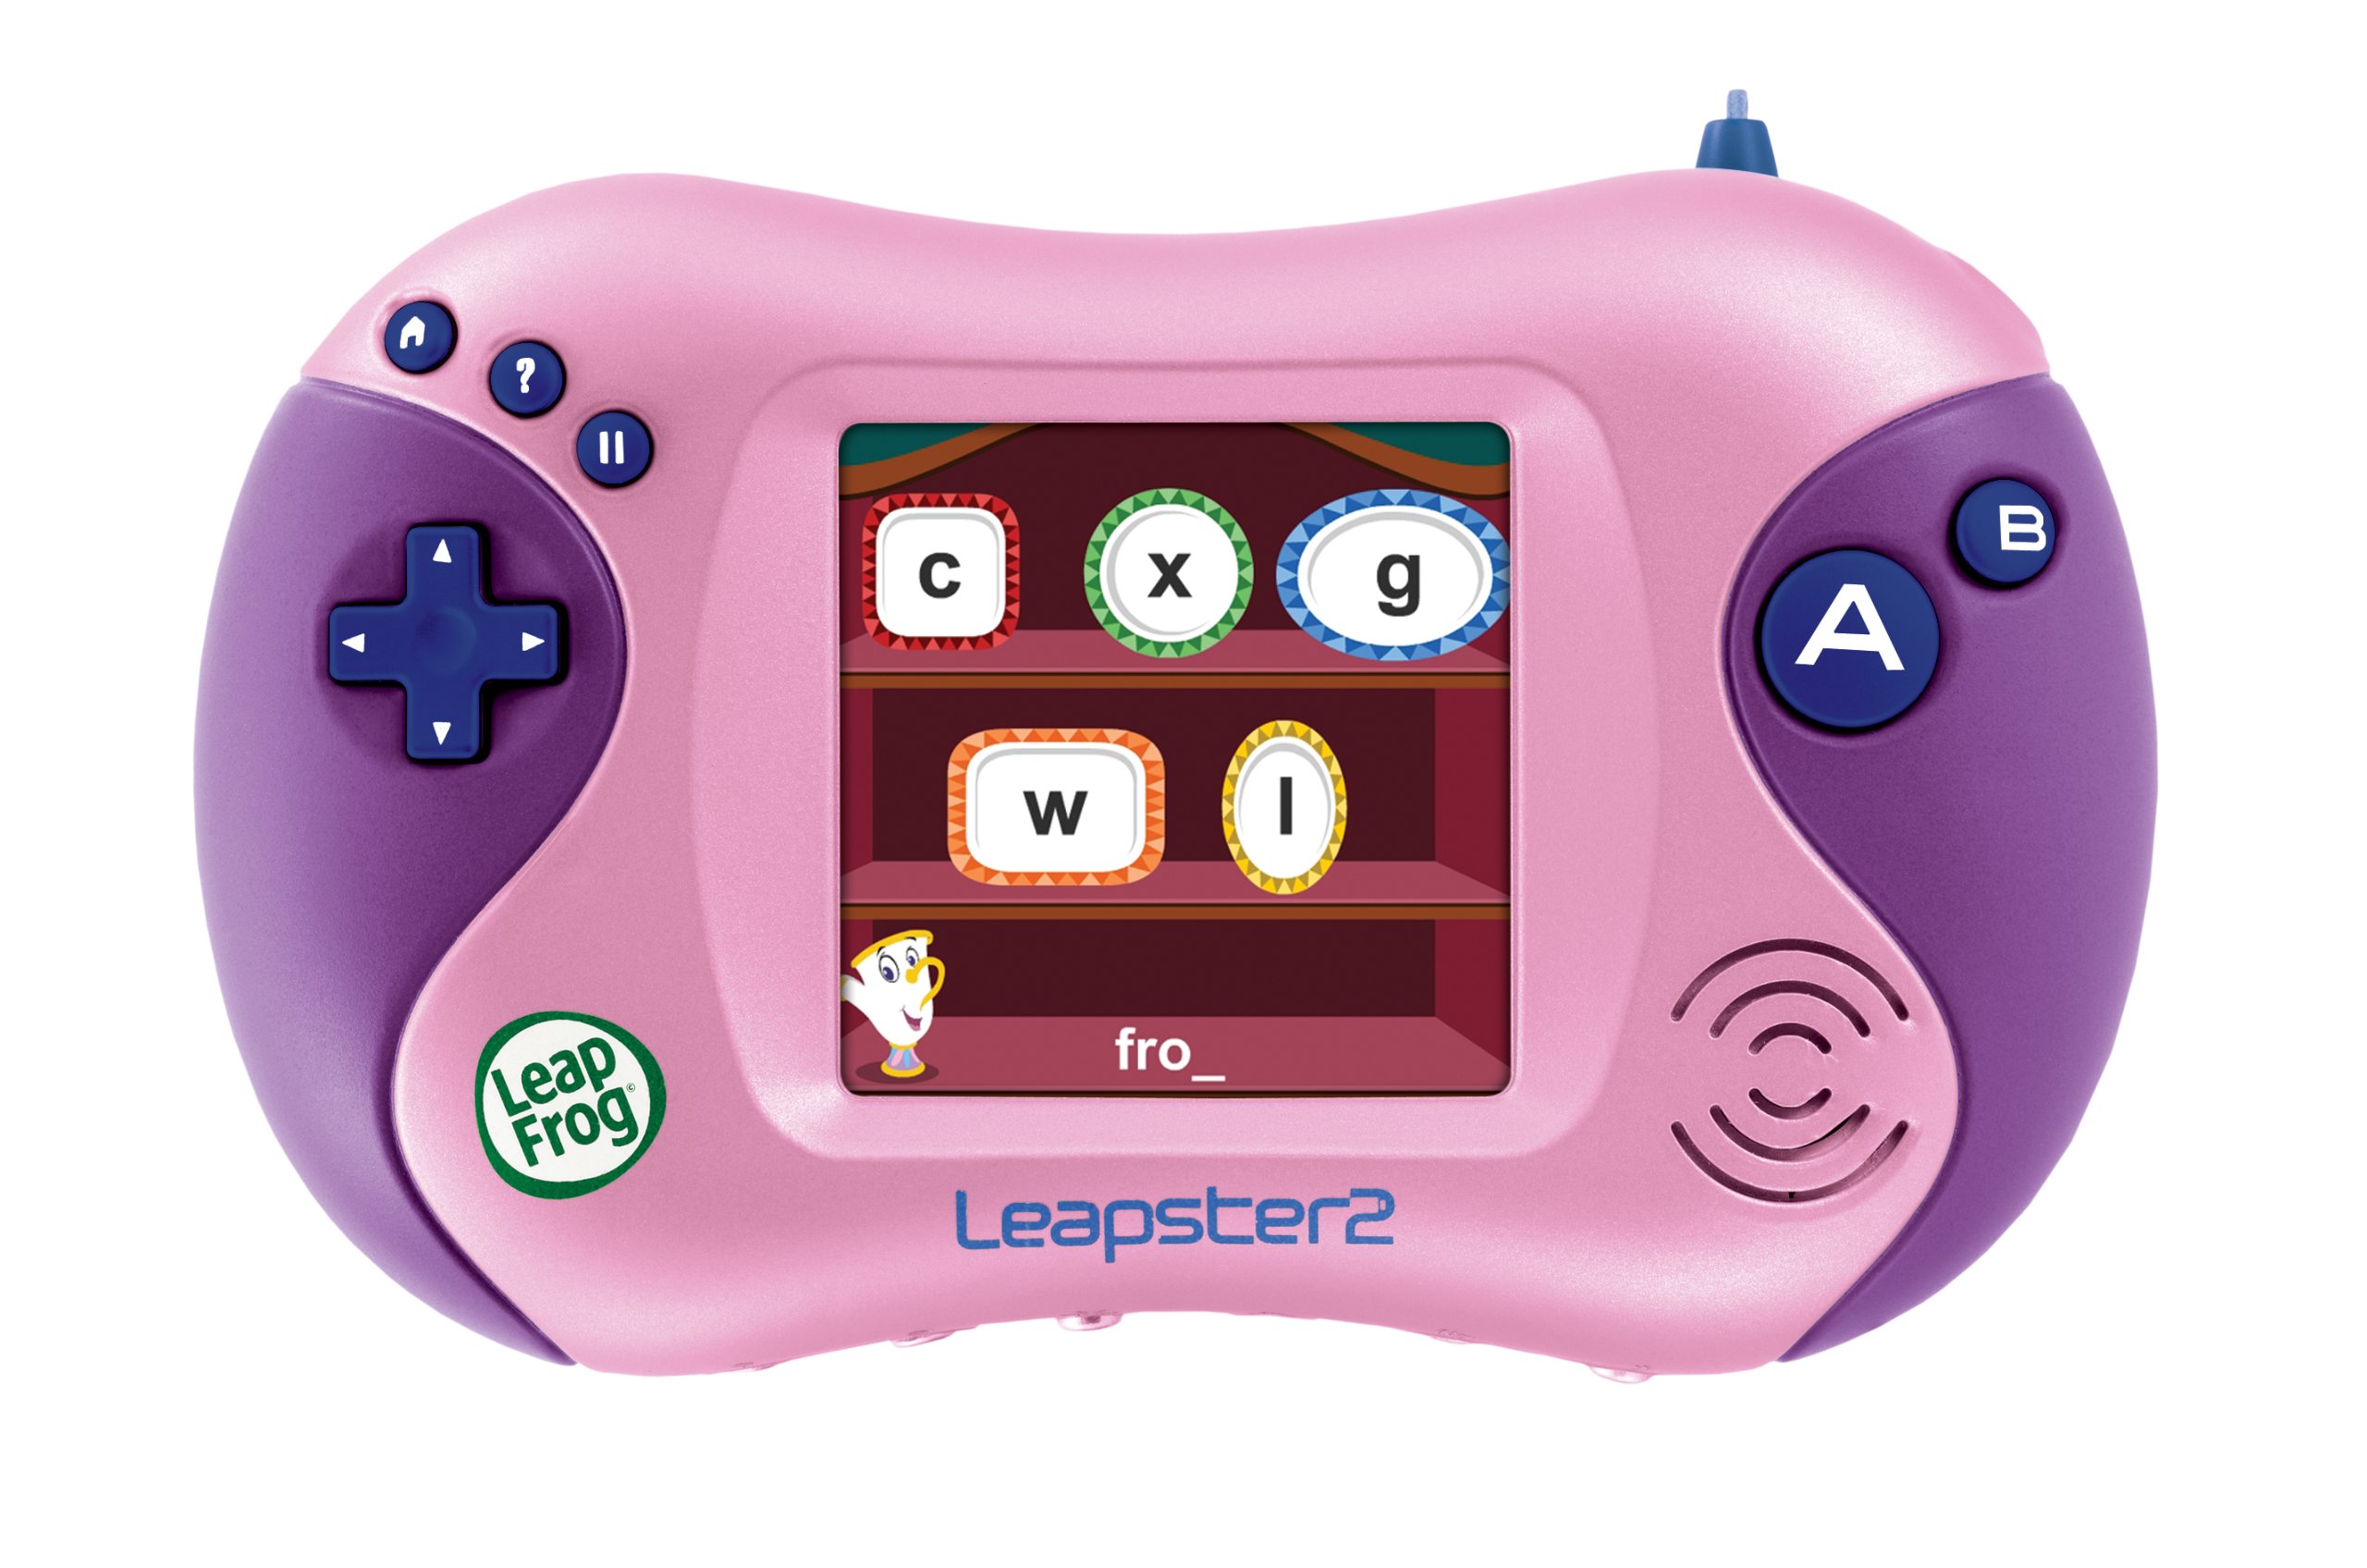 LeapFrog Leapster Learning Game Disney Princess Worlds Of Enchantment